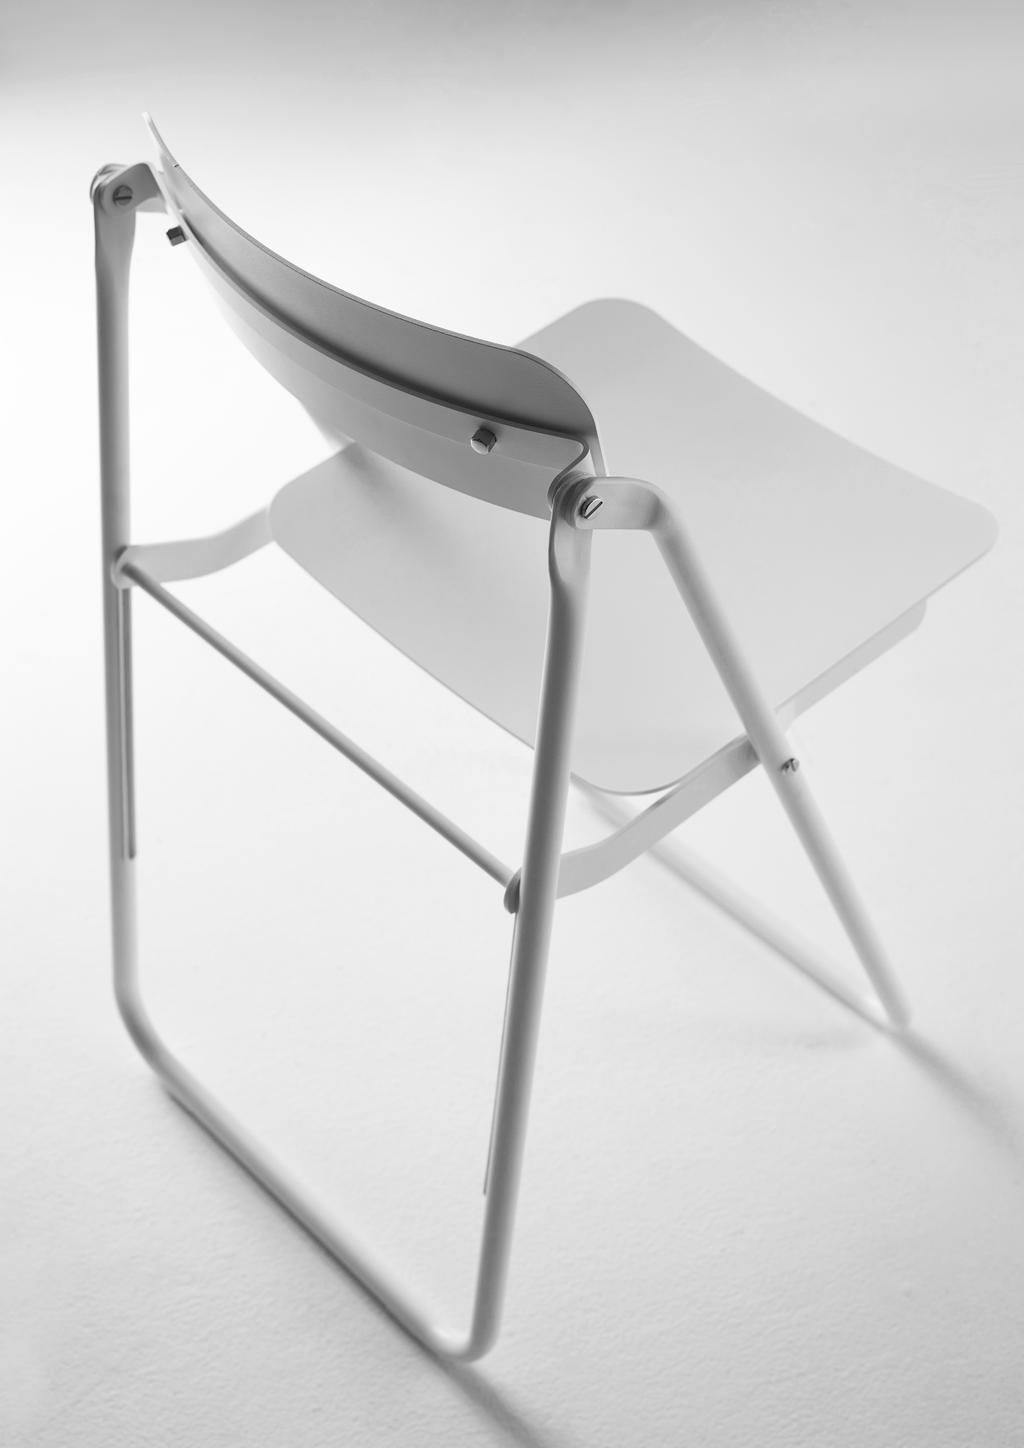 Characteristics: foldable chair in aluminium with tilting back rest. Matt finishing: lacquered white and black.